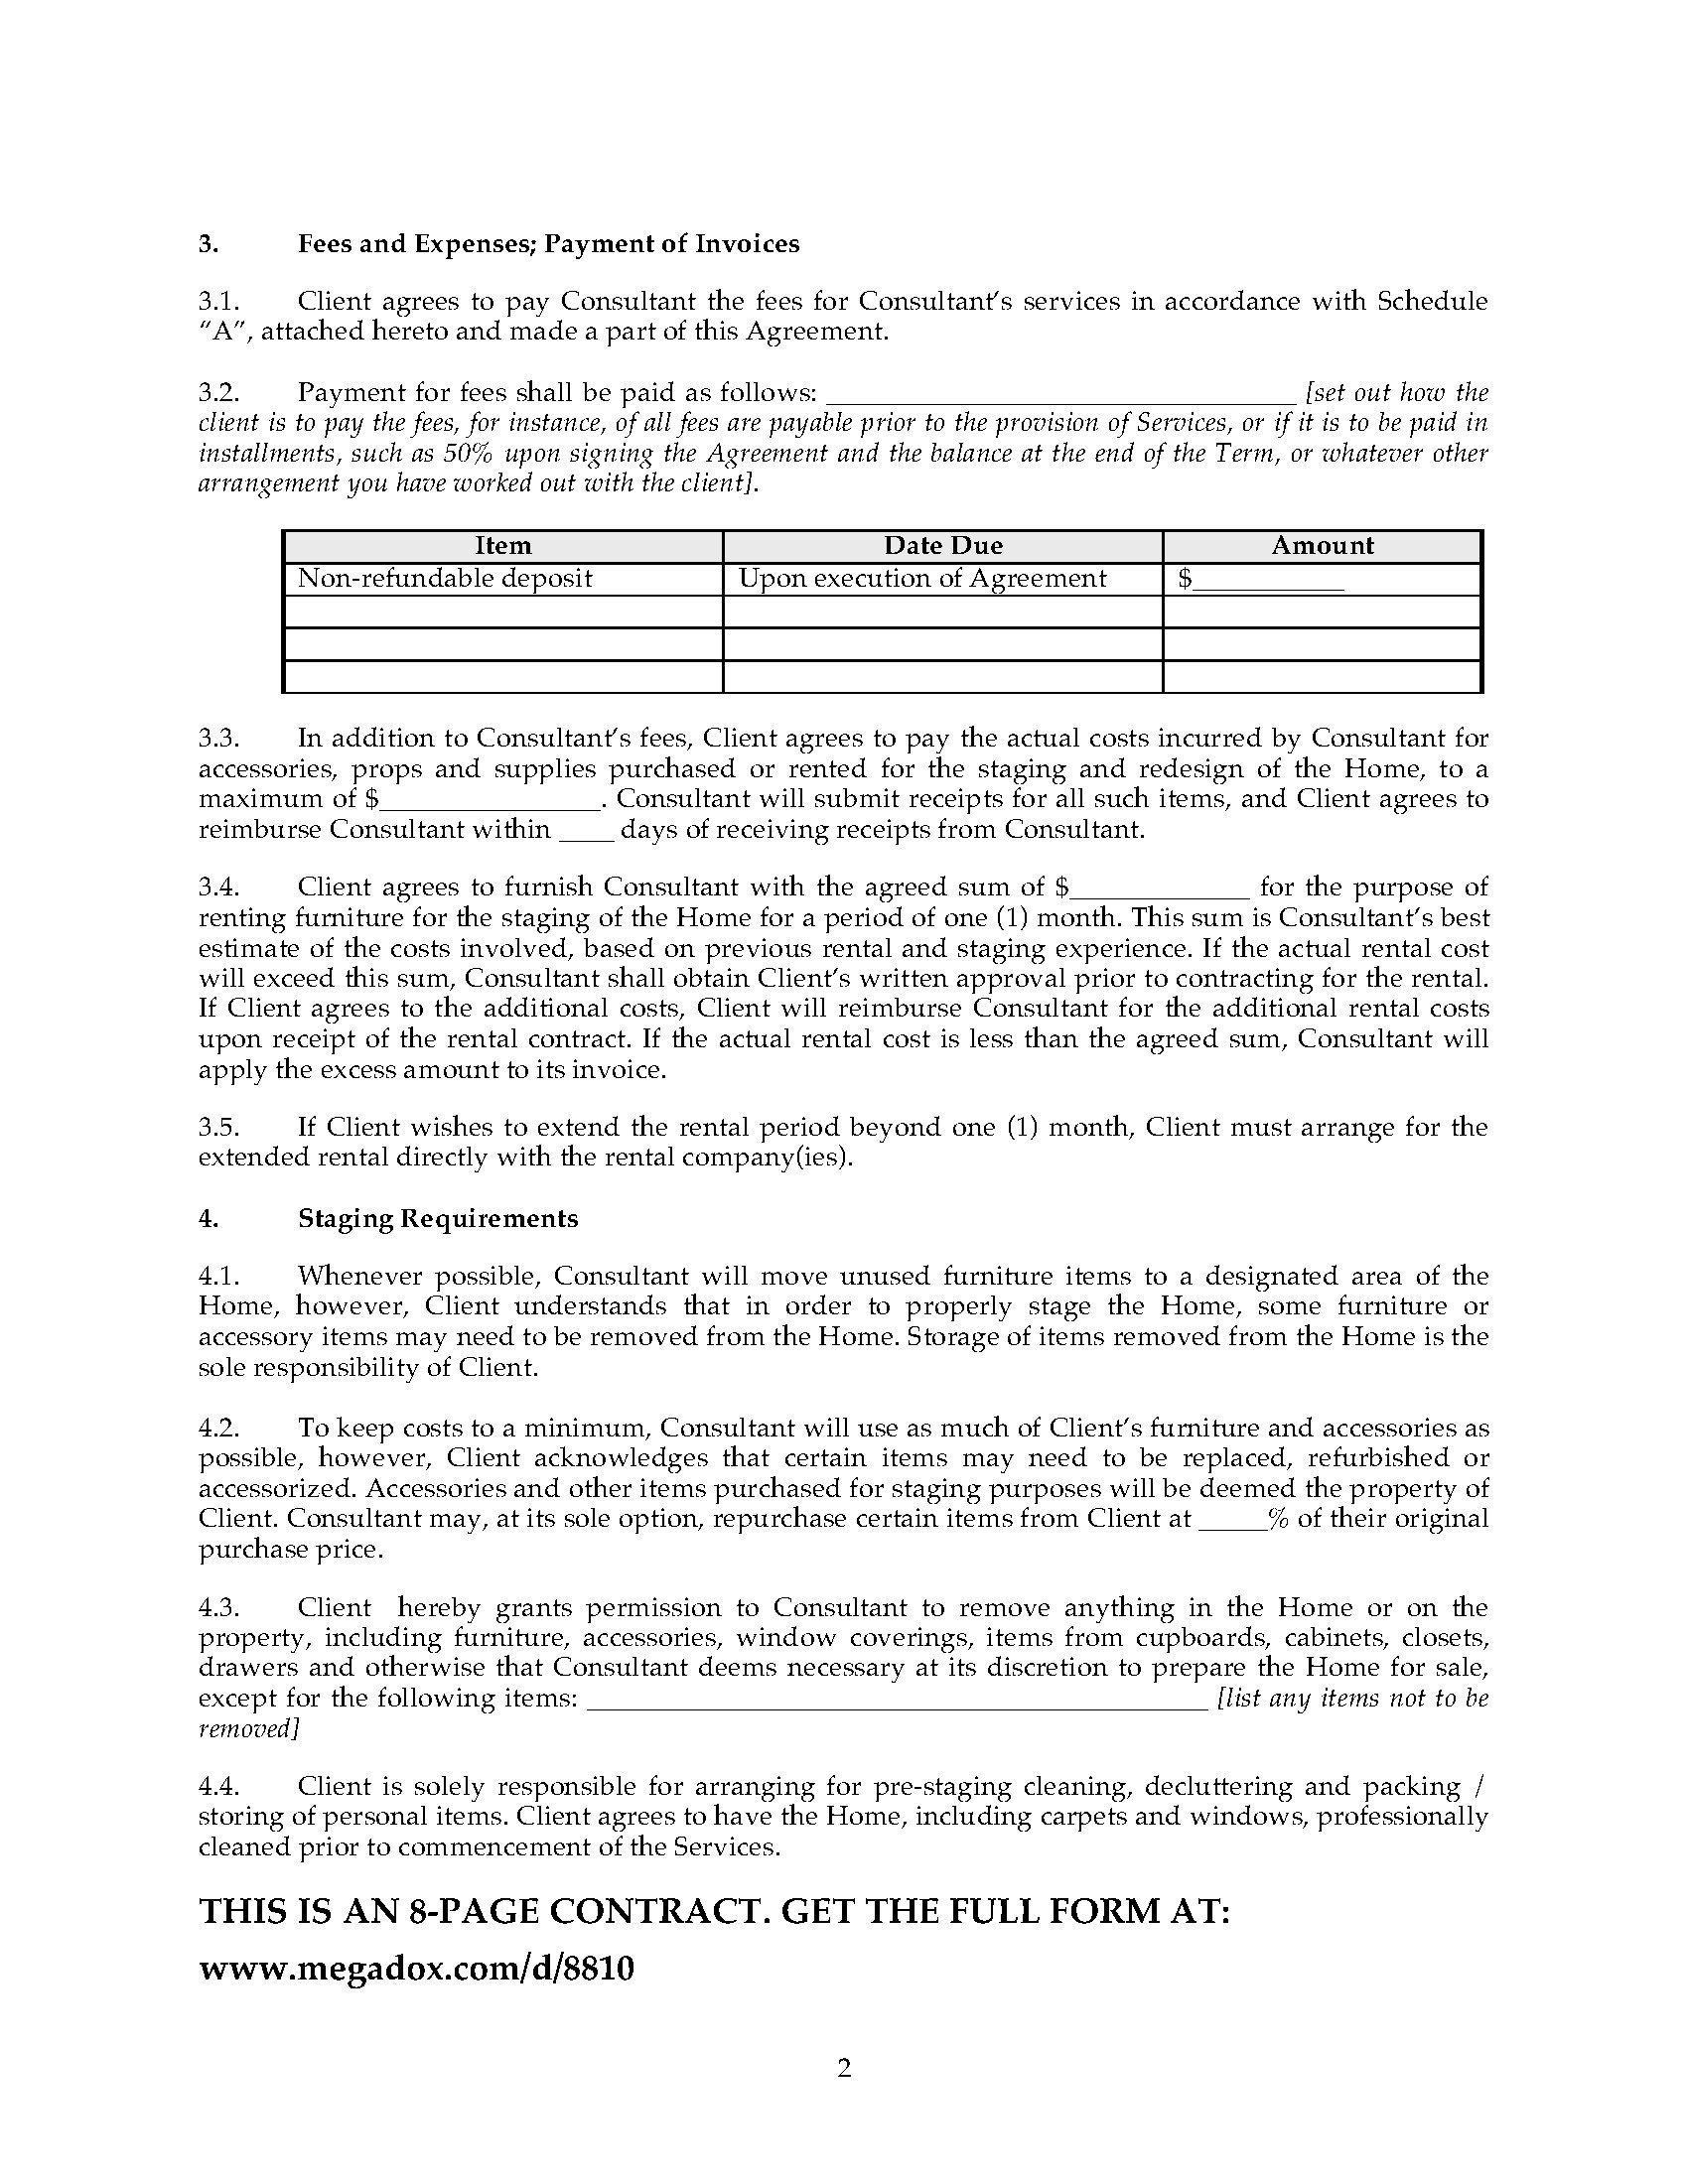 Home Staging Agreement Template